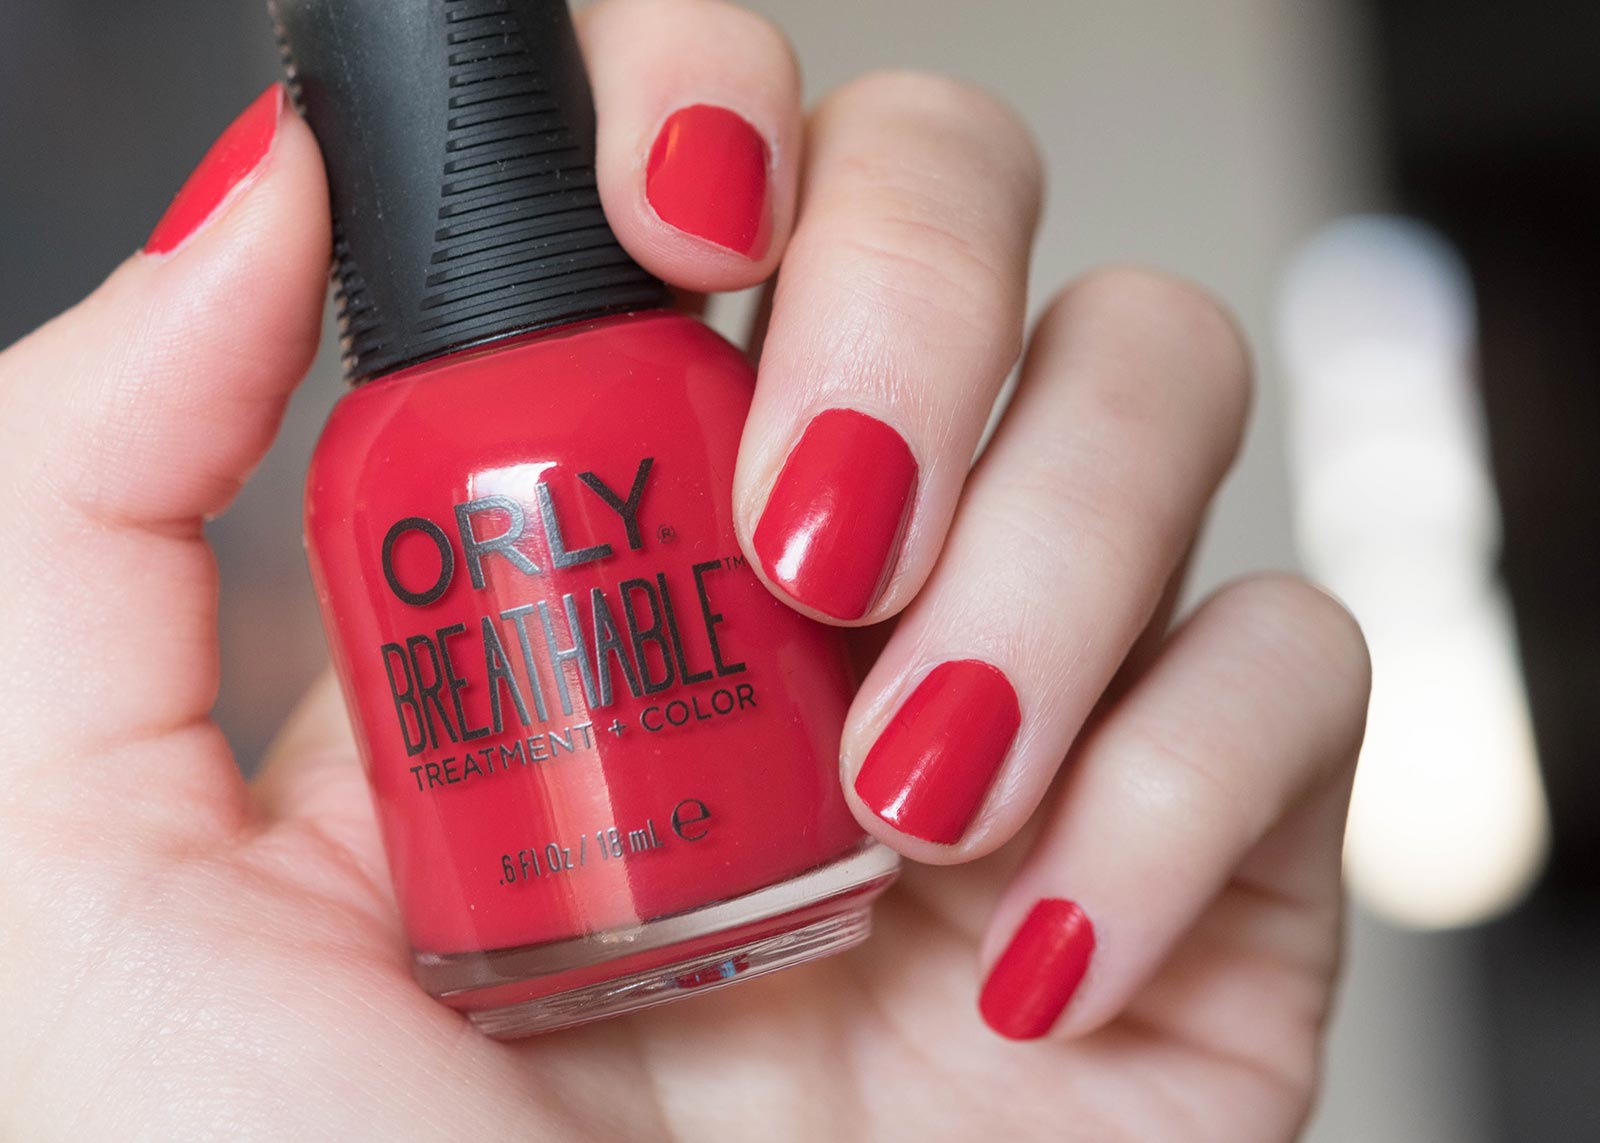 10. Orly Nail Lacquer in "Coffee Break" - wide 1